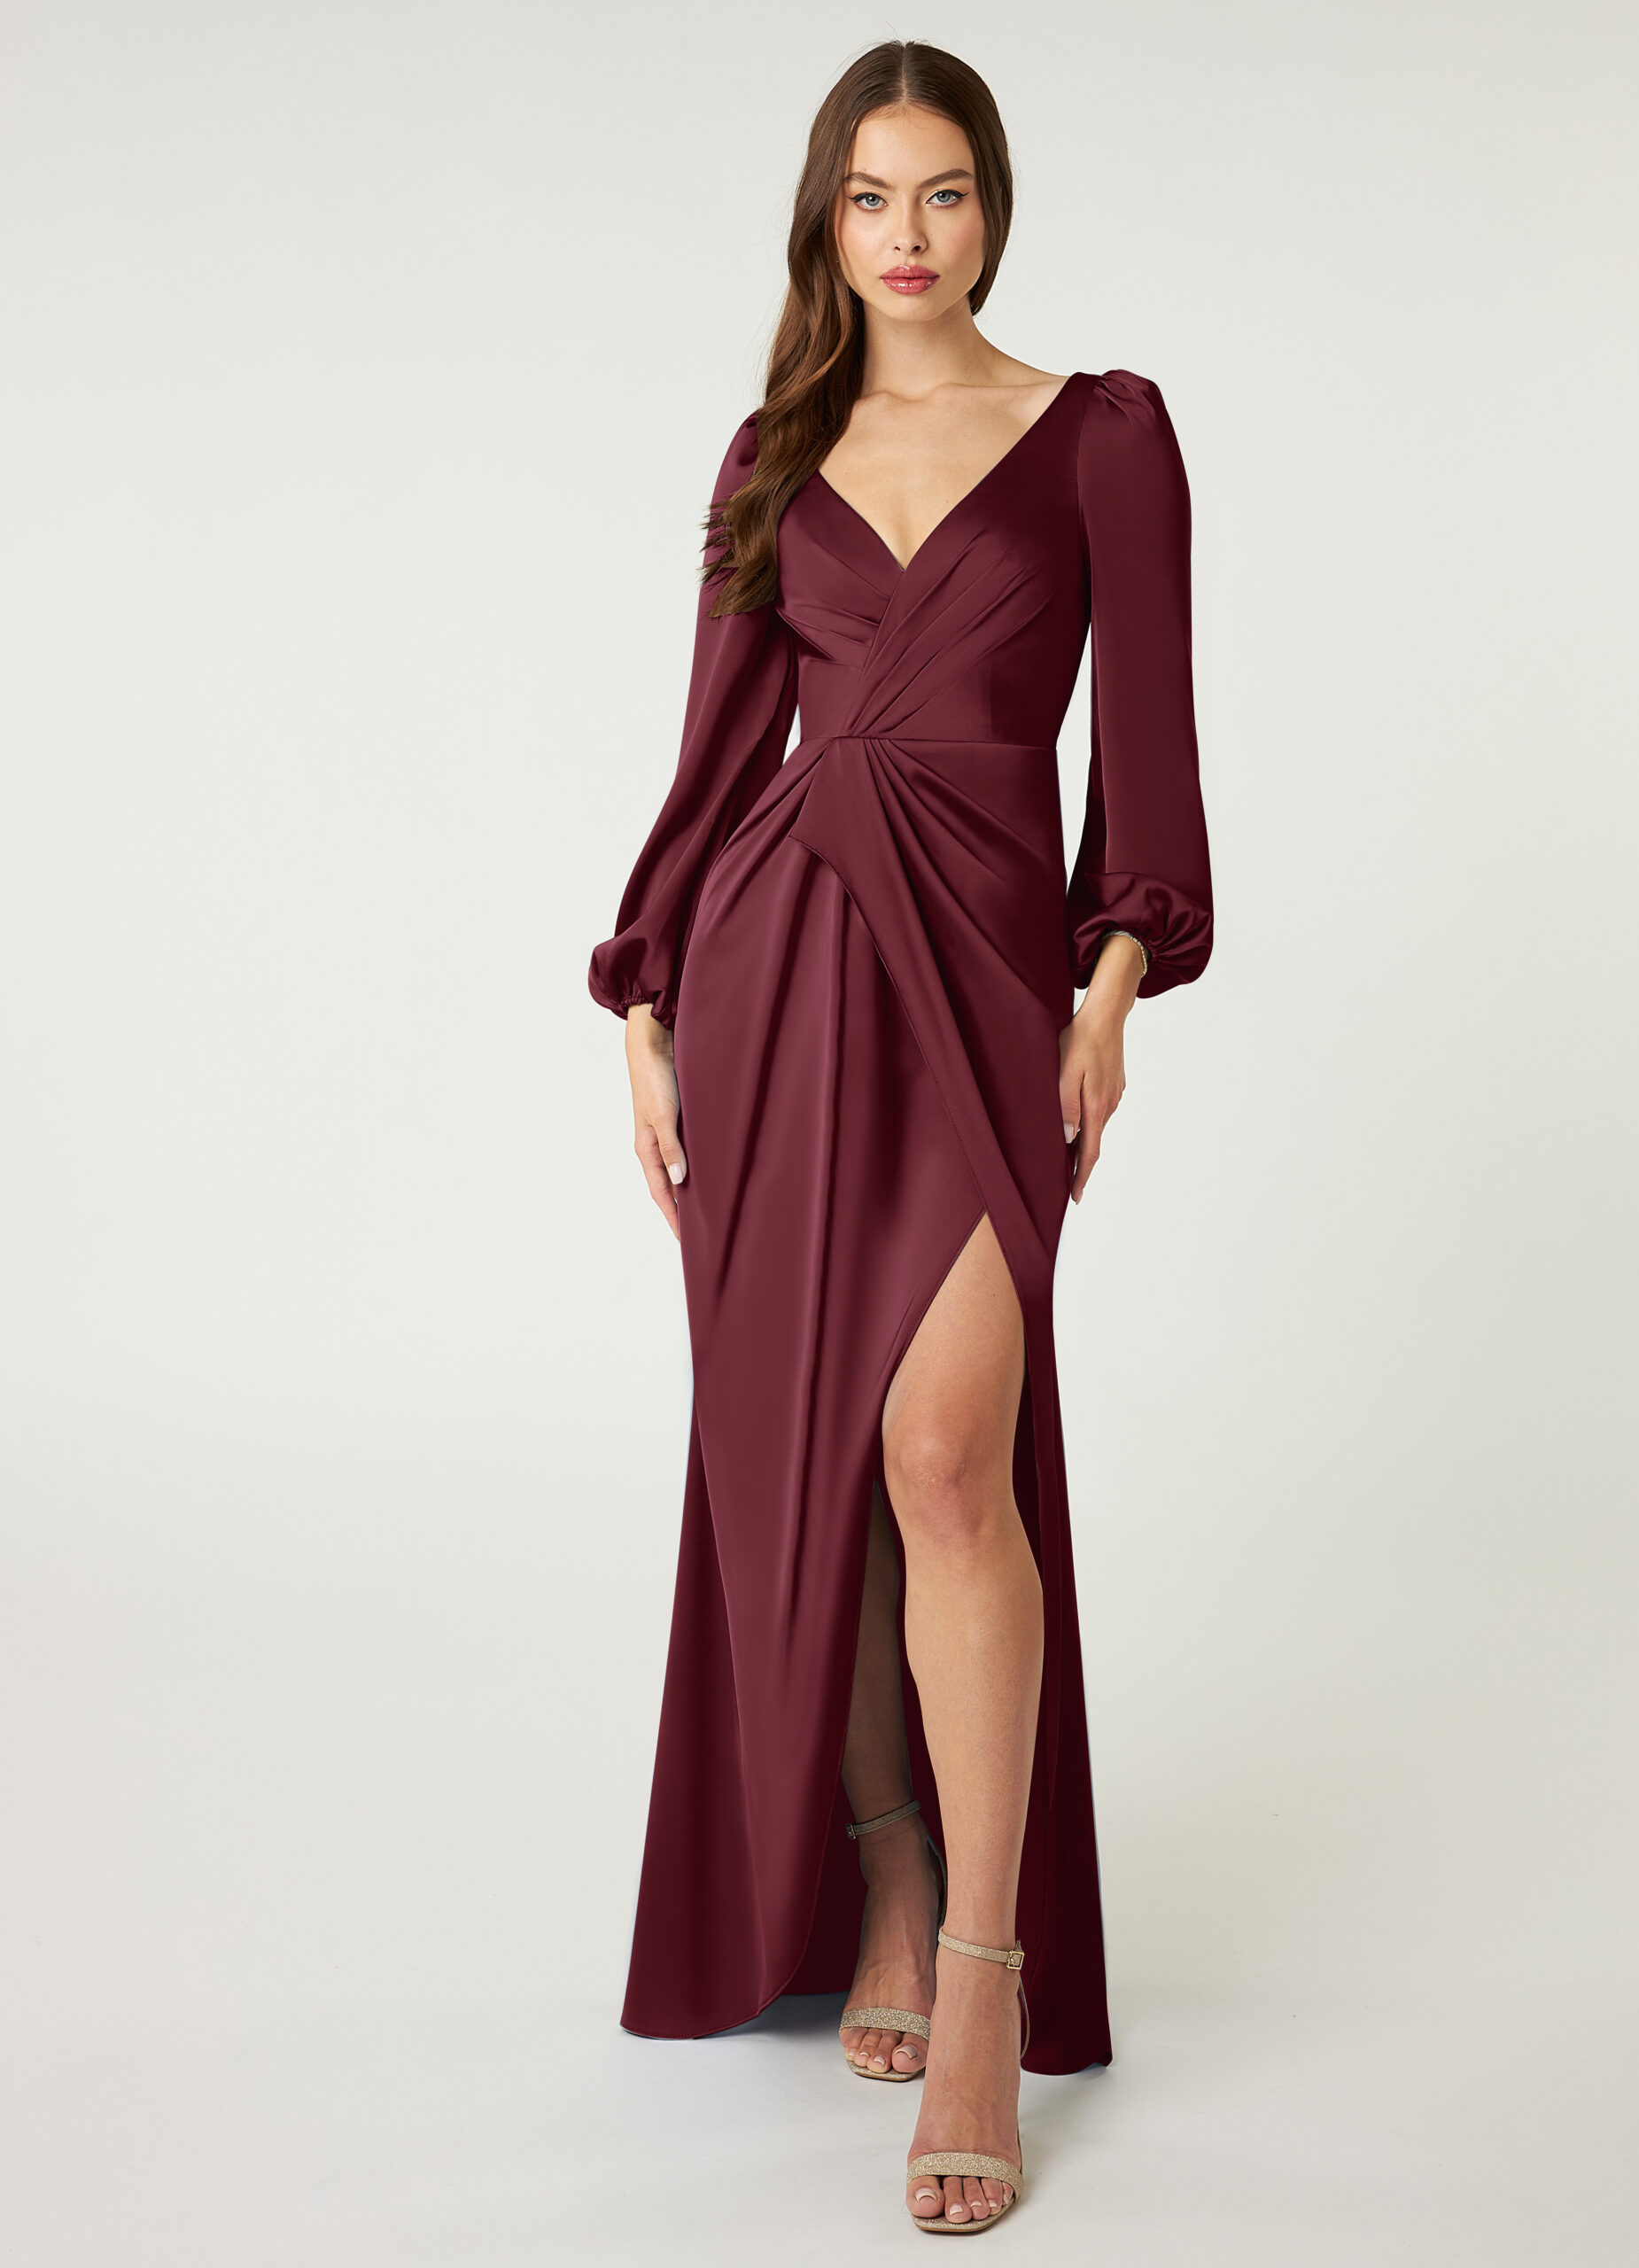 This Azazie dress is perfect for your bridesmaids.